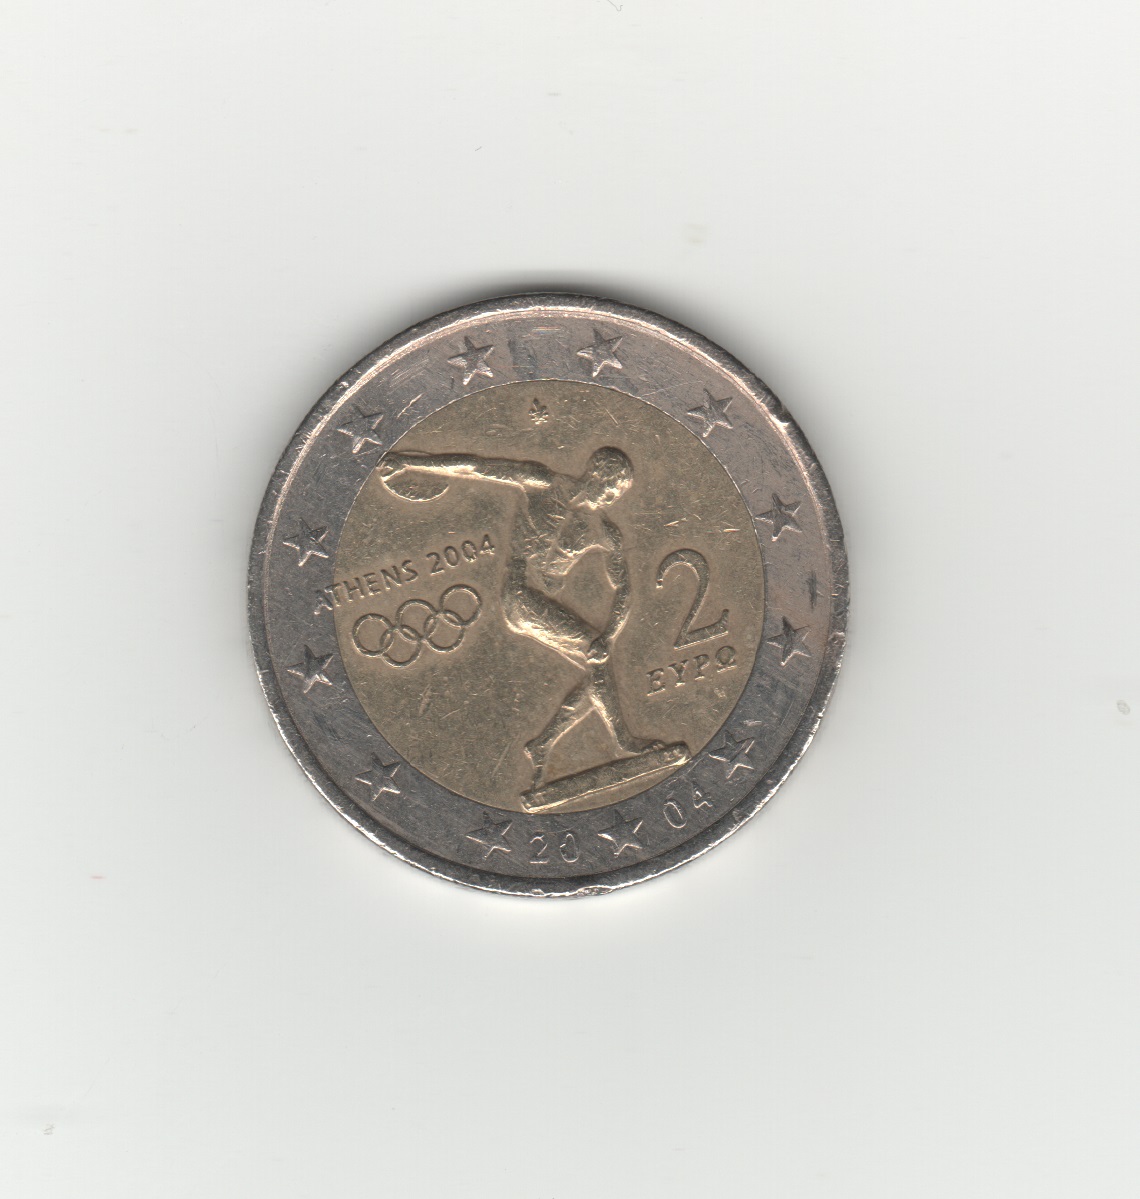  Griechenland 2 Euro 2004 Olympia   